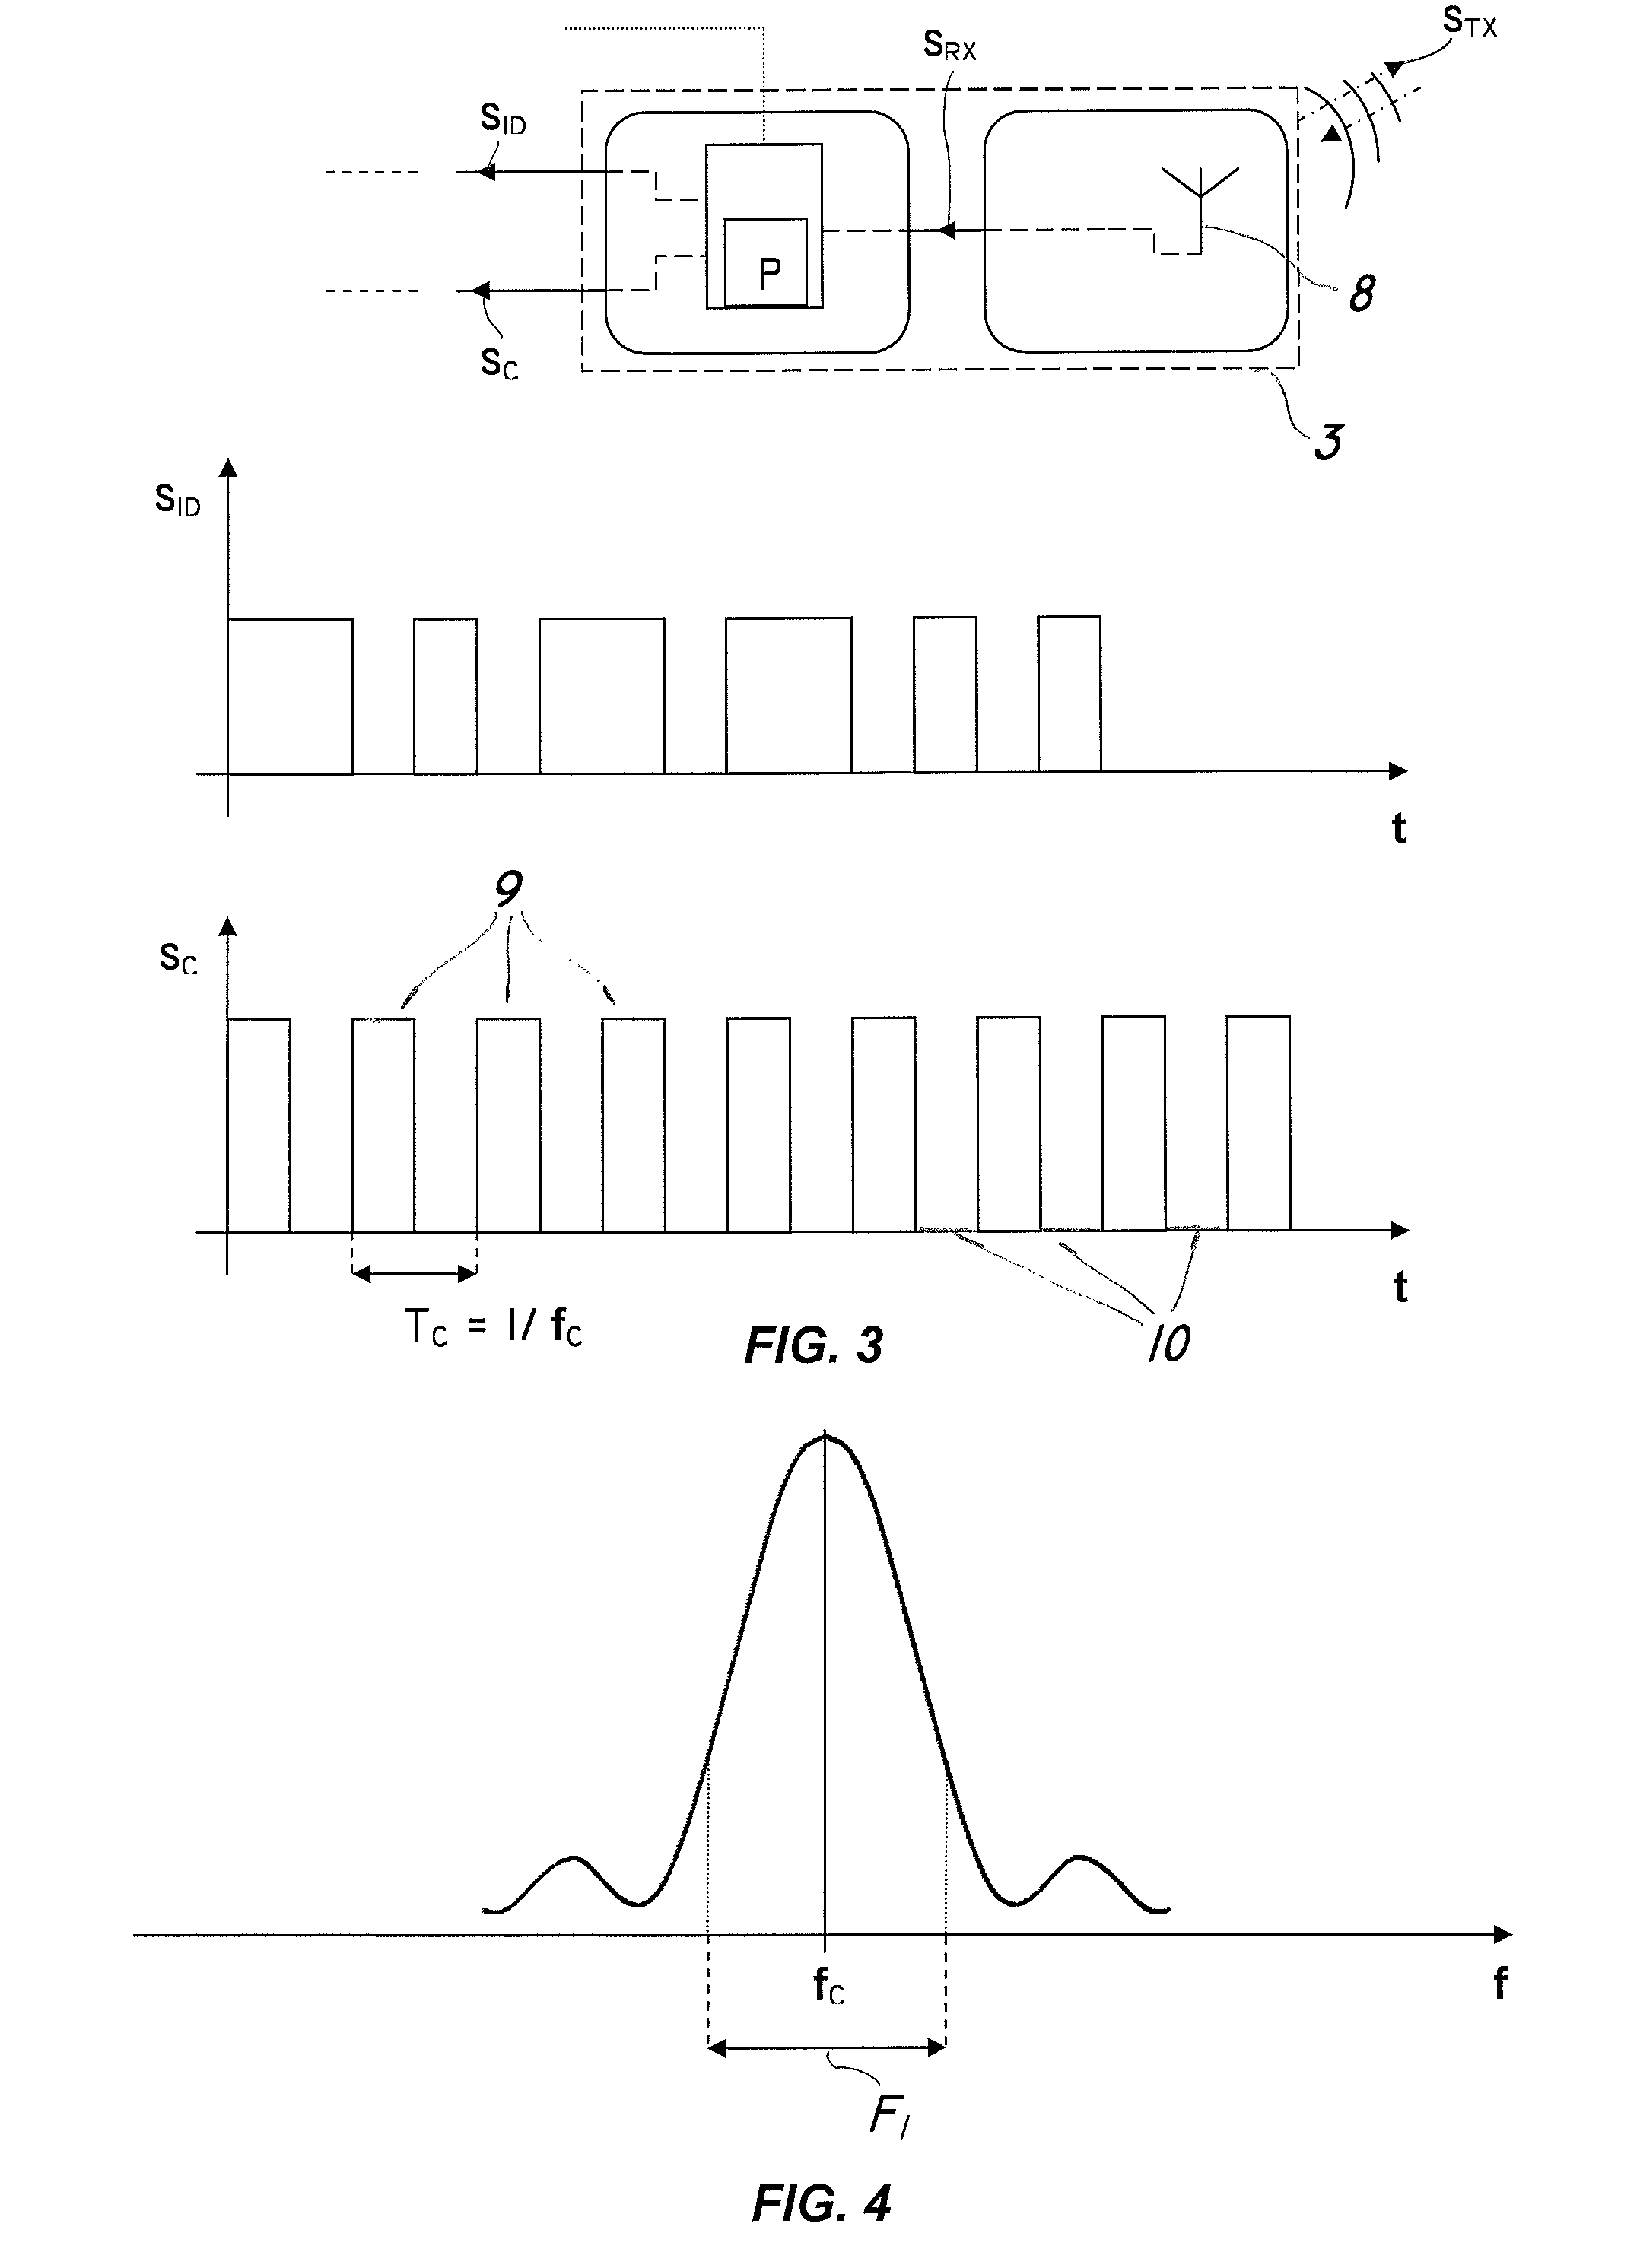 Electronic safety device for a protection barrier